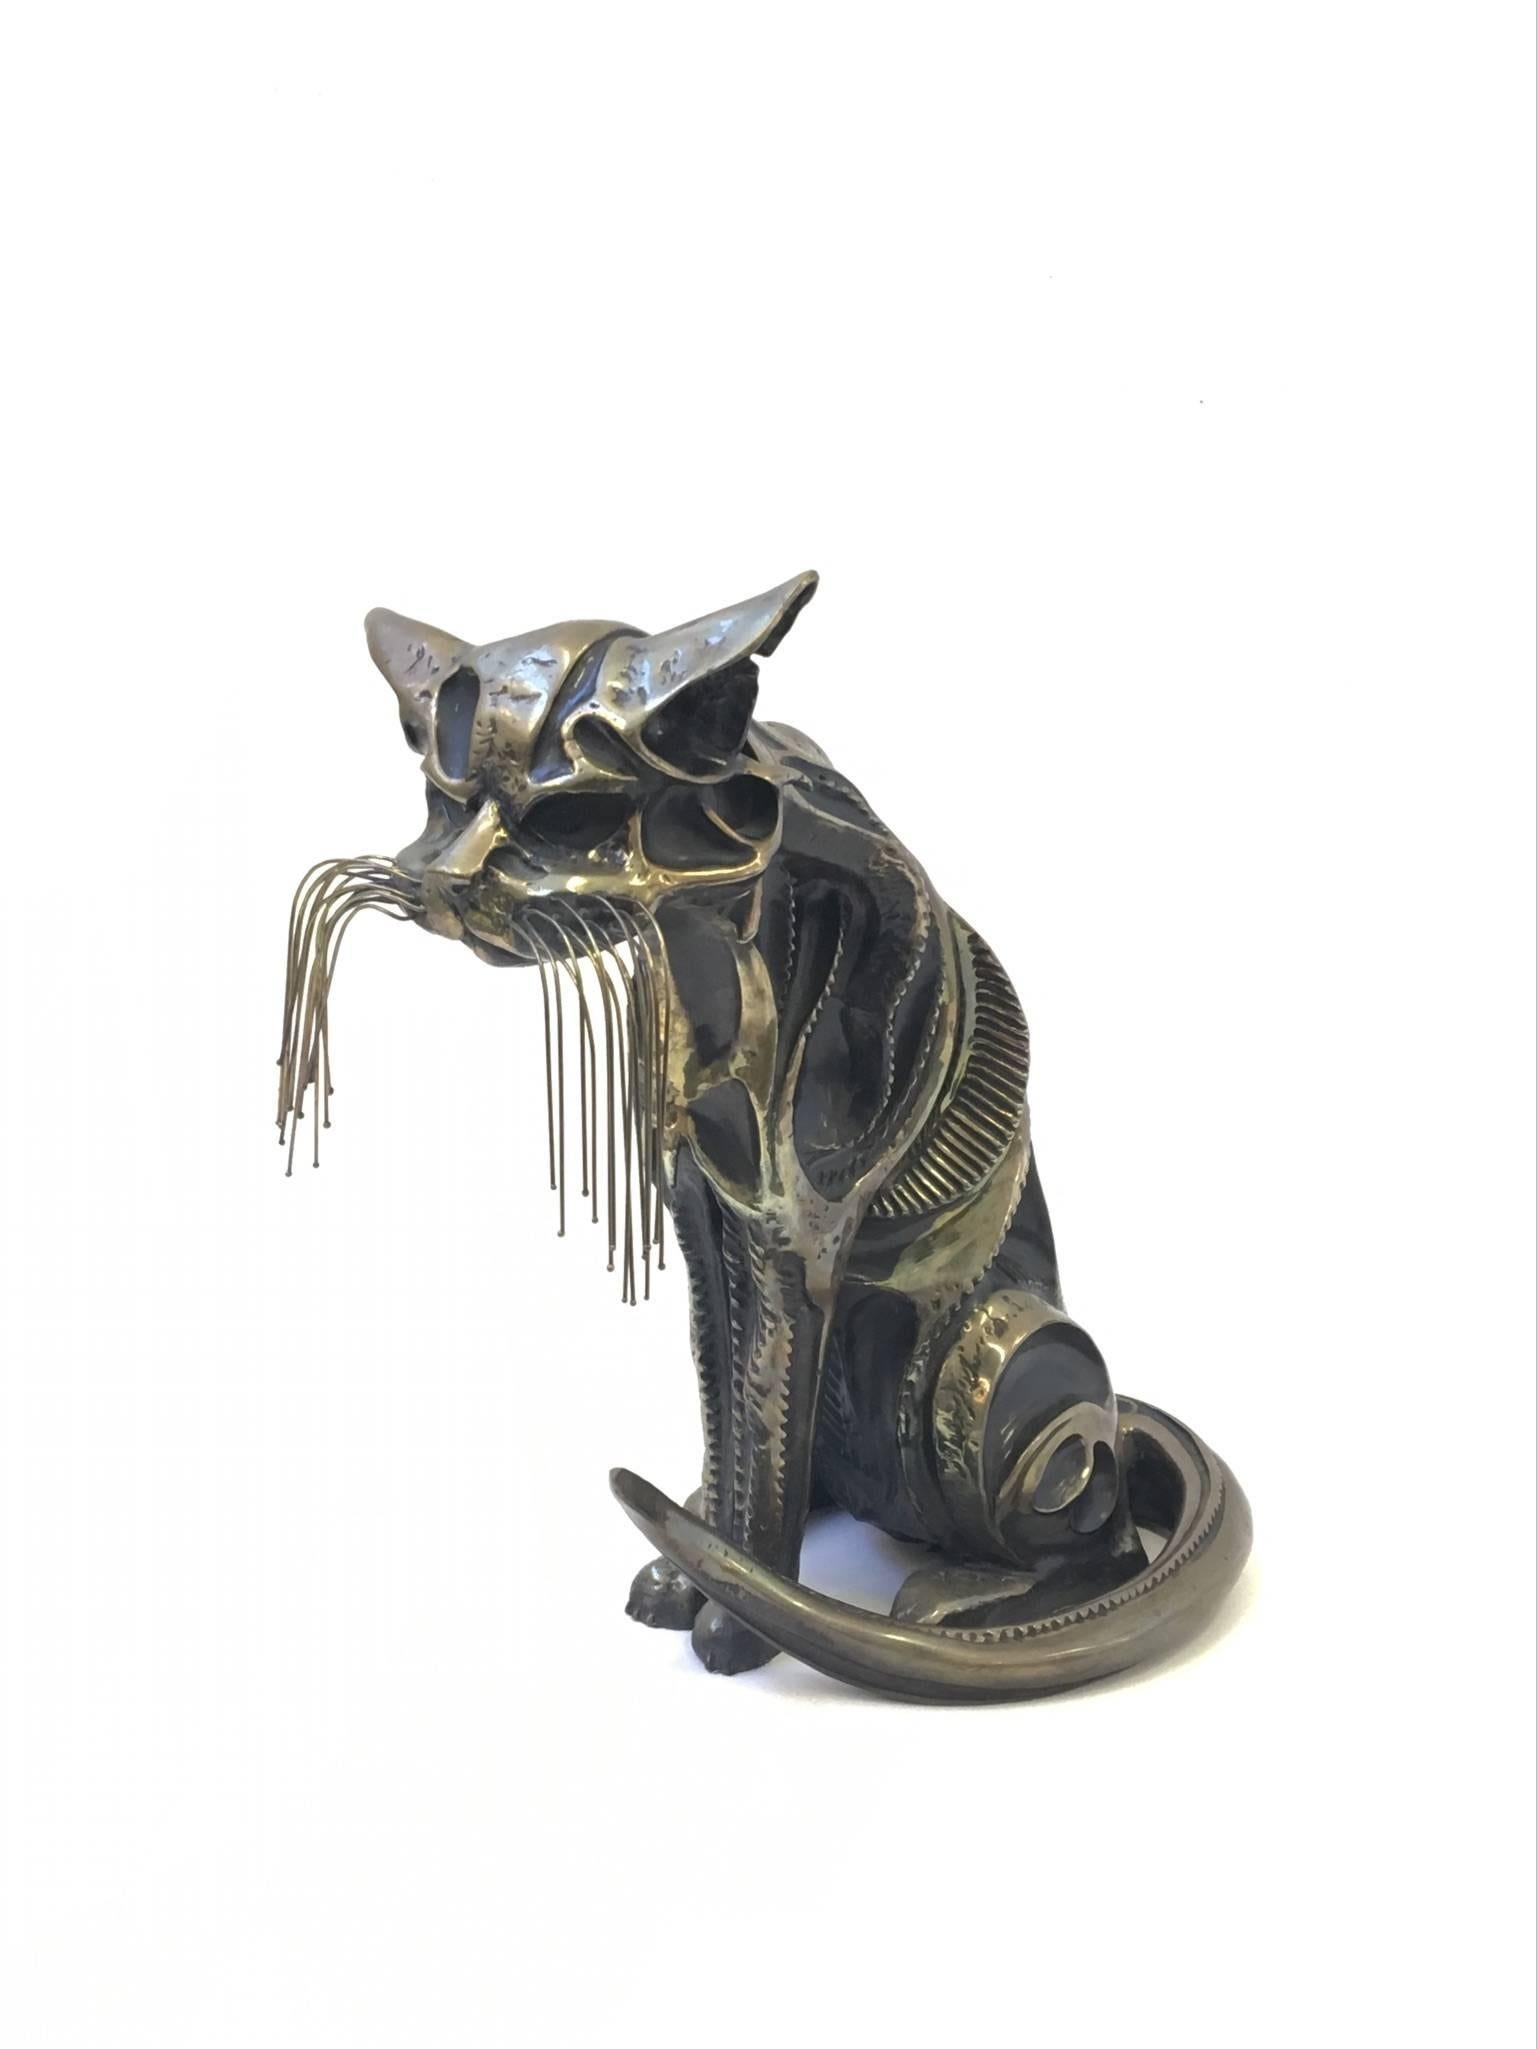 Late 20th Century Bronze Cat Sculpture Signed and Numbered by John Jagger